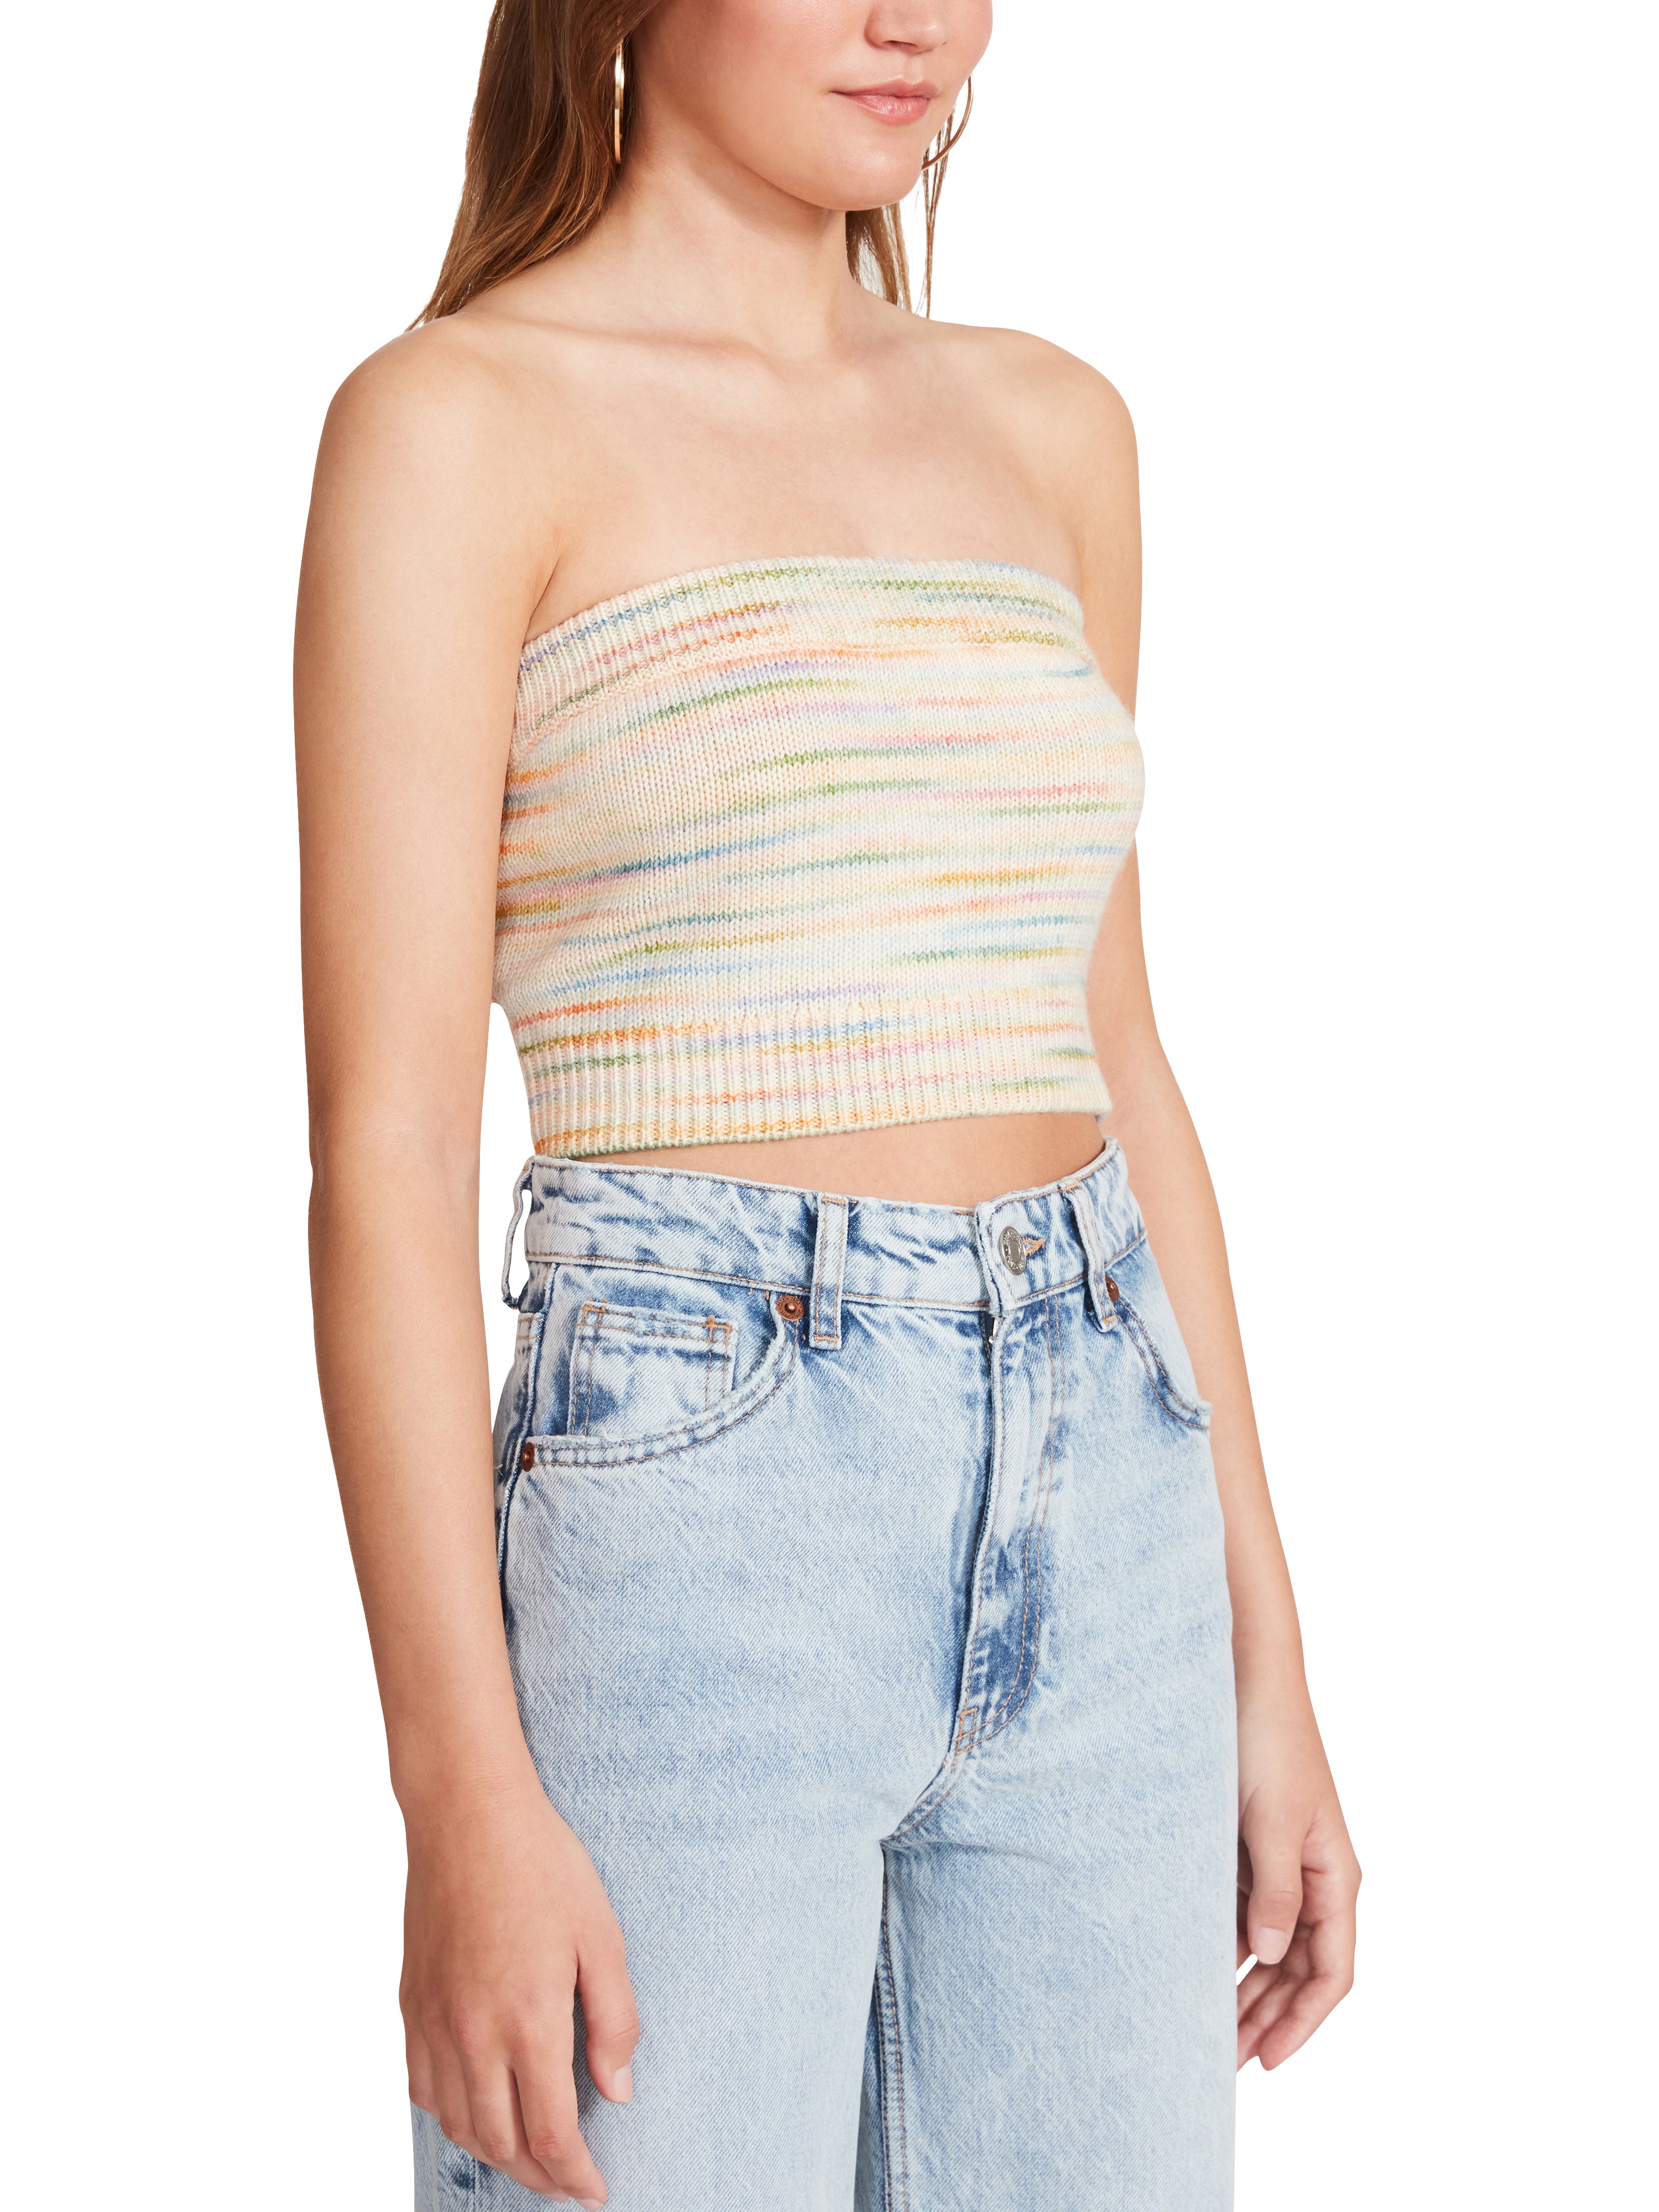 Steady Space Tube Top